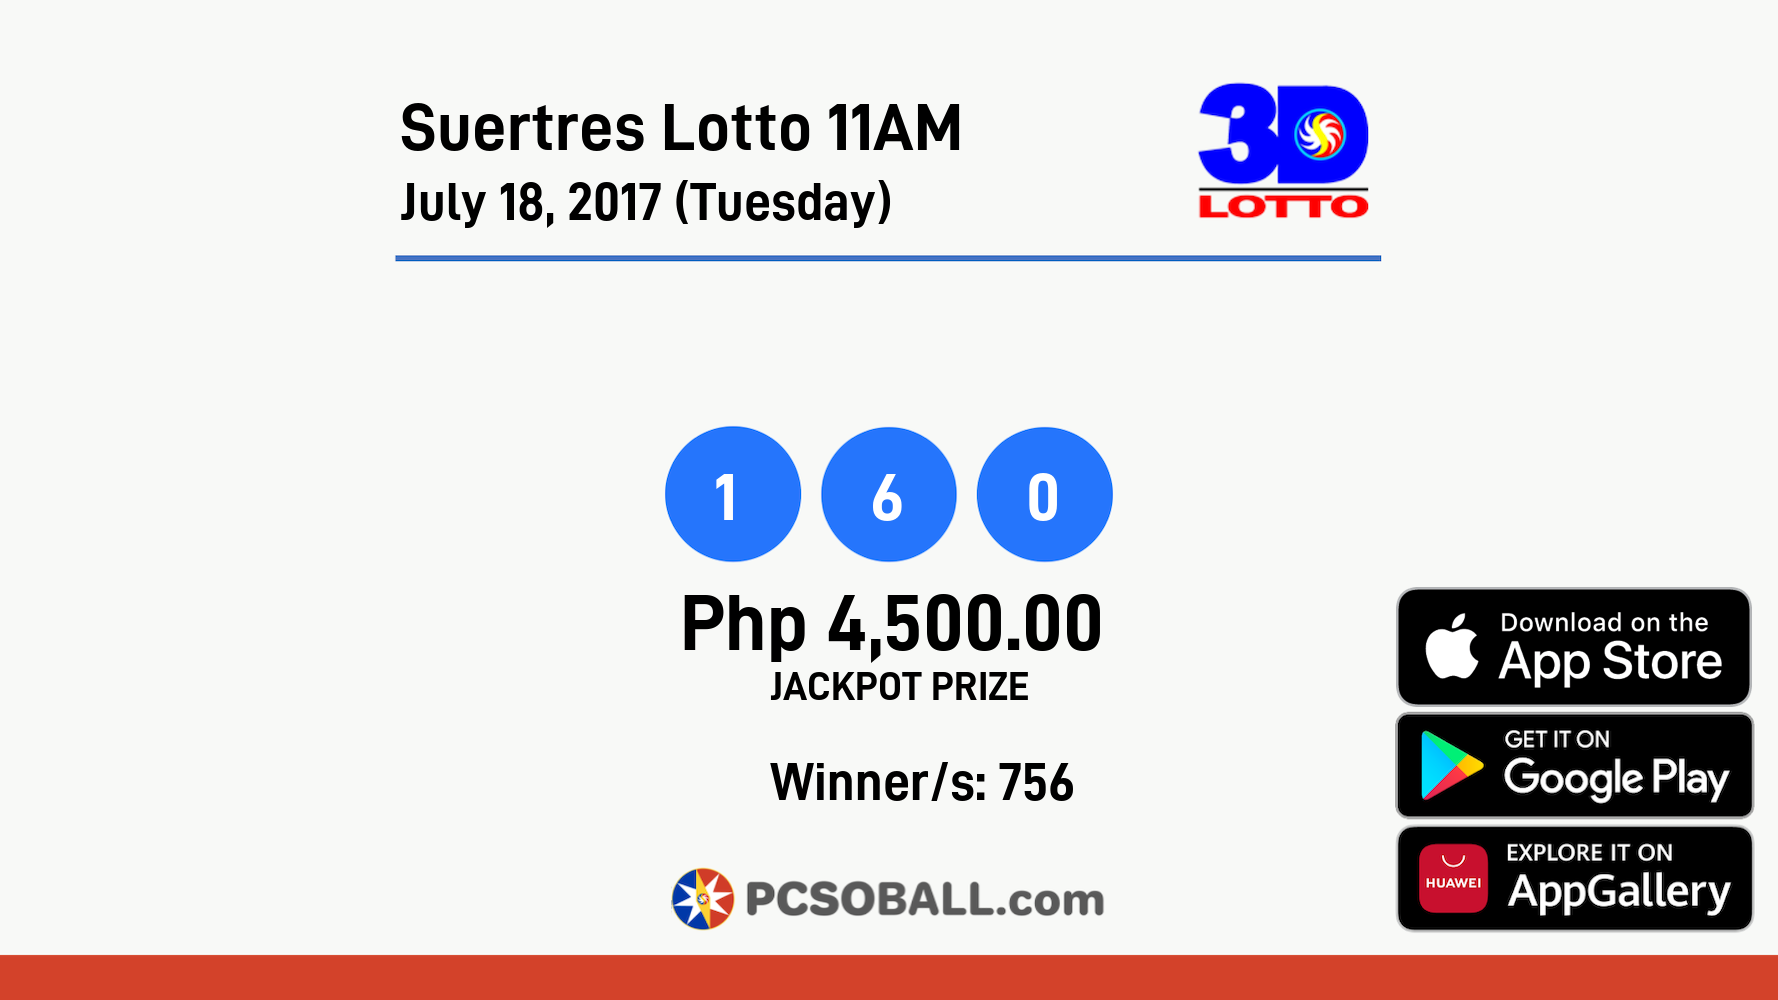 Suertres Lotto 11AM July 18, 2017 (Tuesday) Result